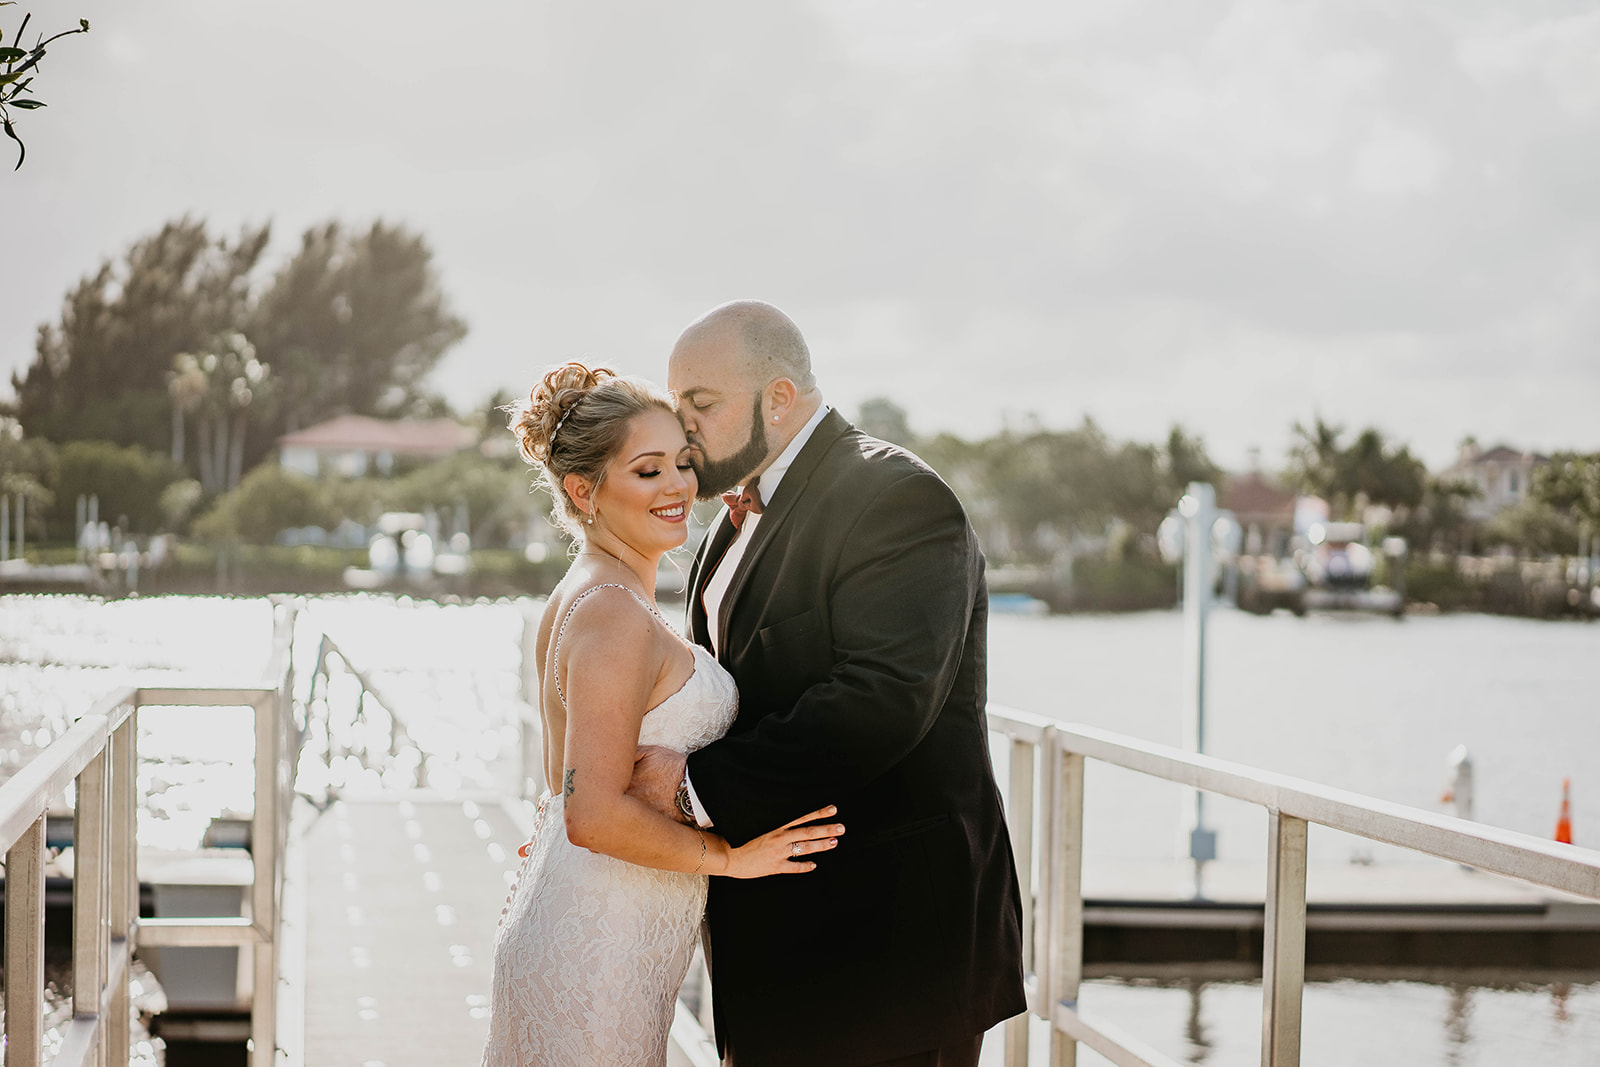 Waterfront Bride and Groom Wedding Portrait Photography